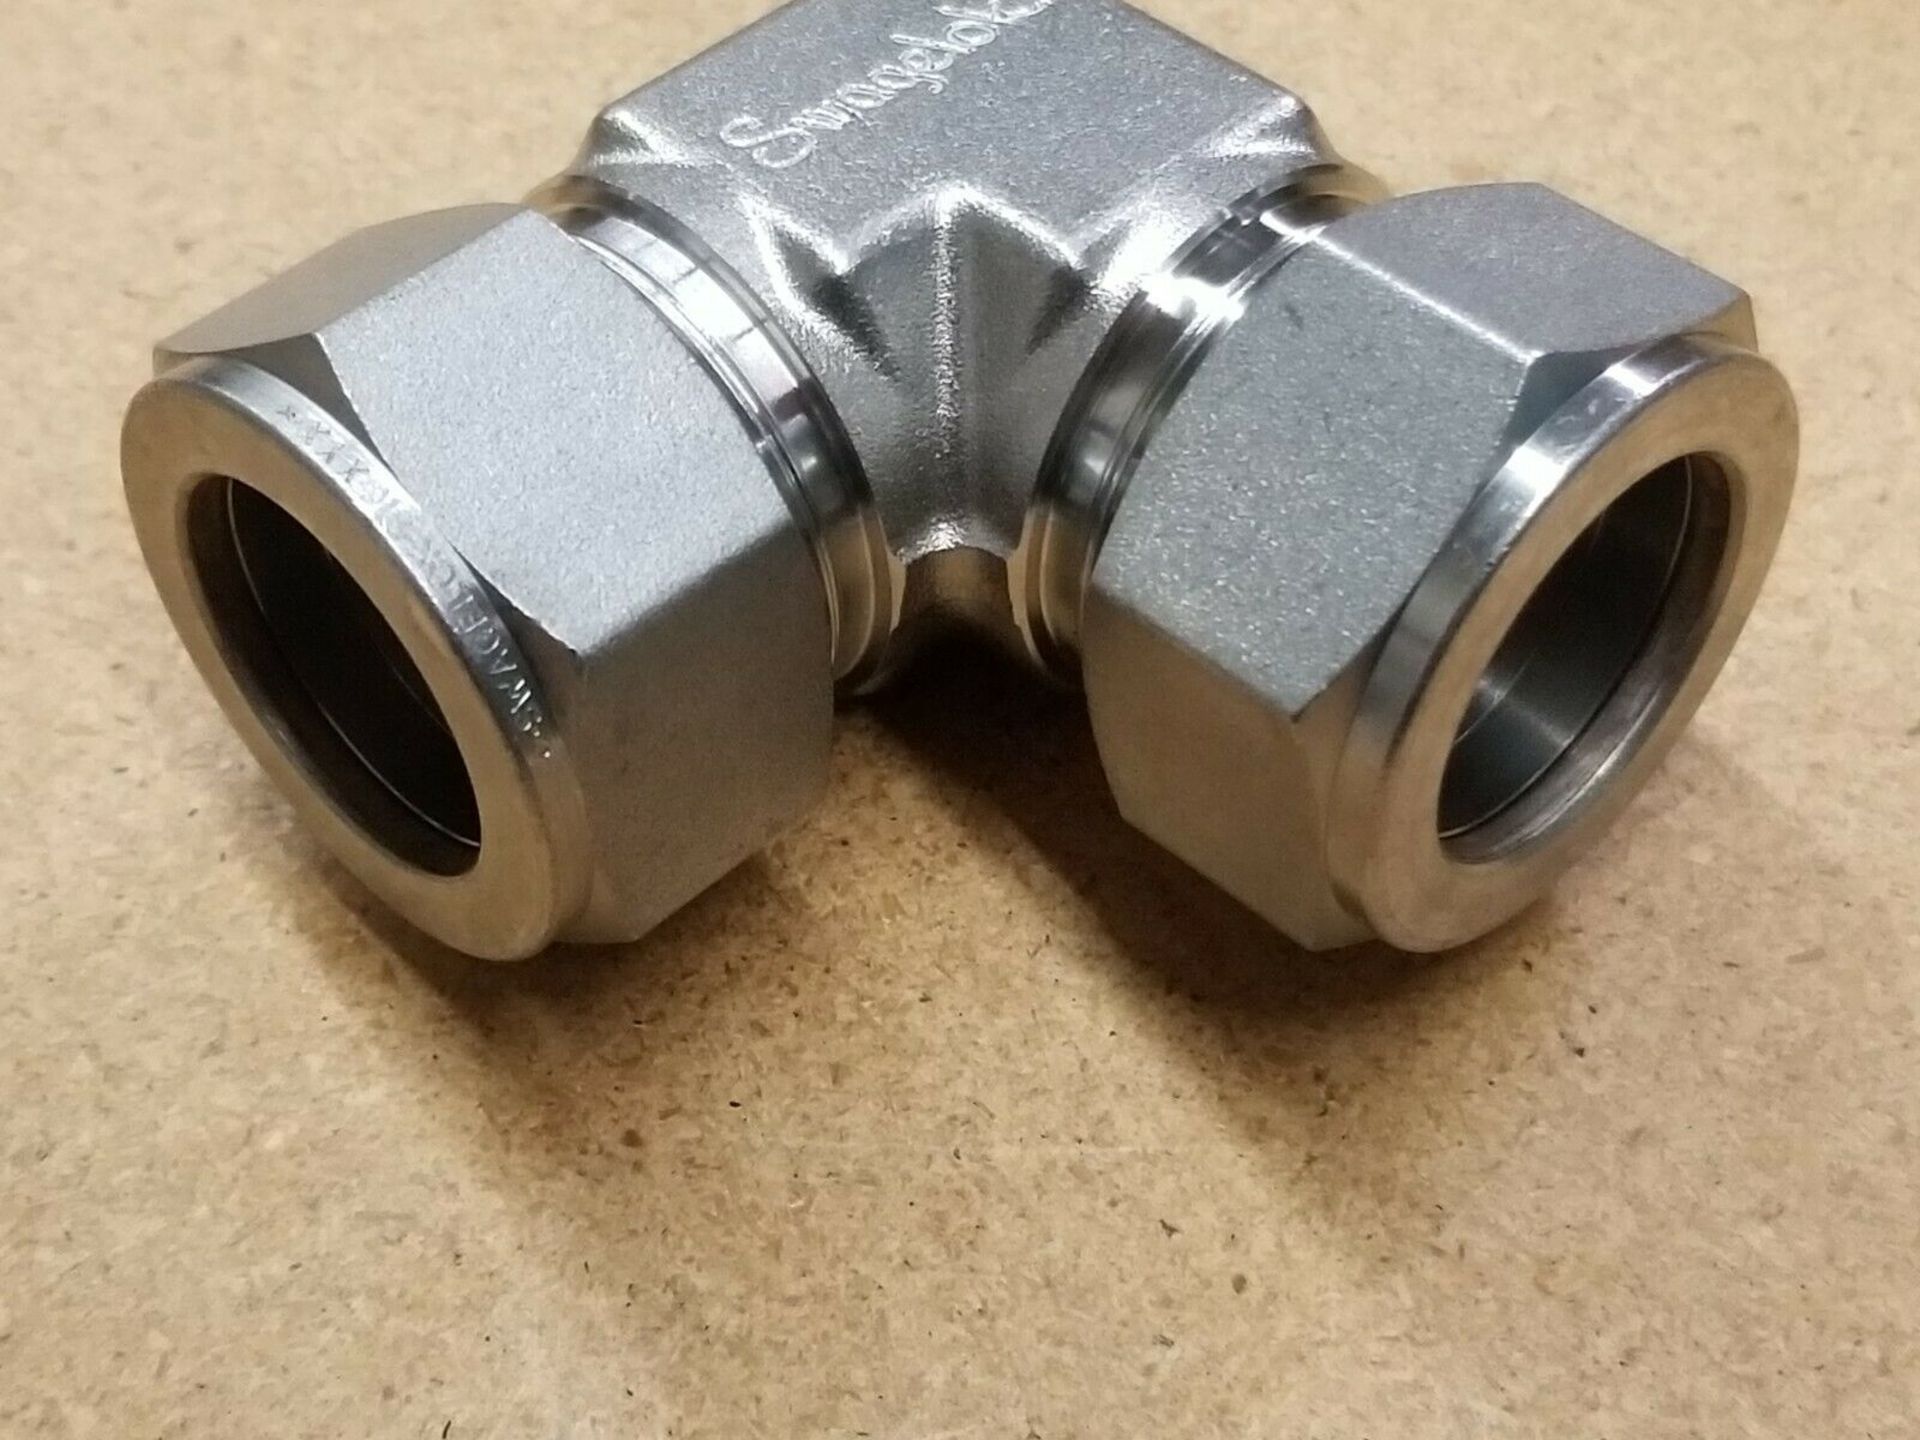 NEW SWAGELOK STAINLESS STEEL 1" TUBE FITTING - Image 2 of 3